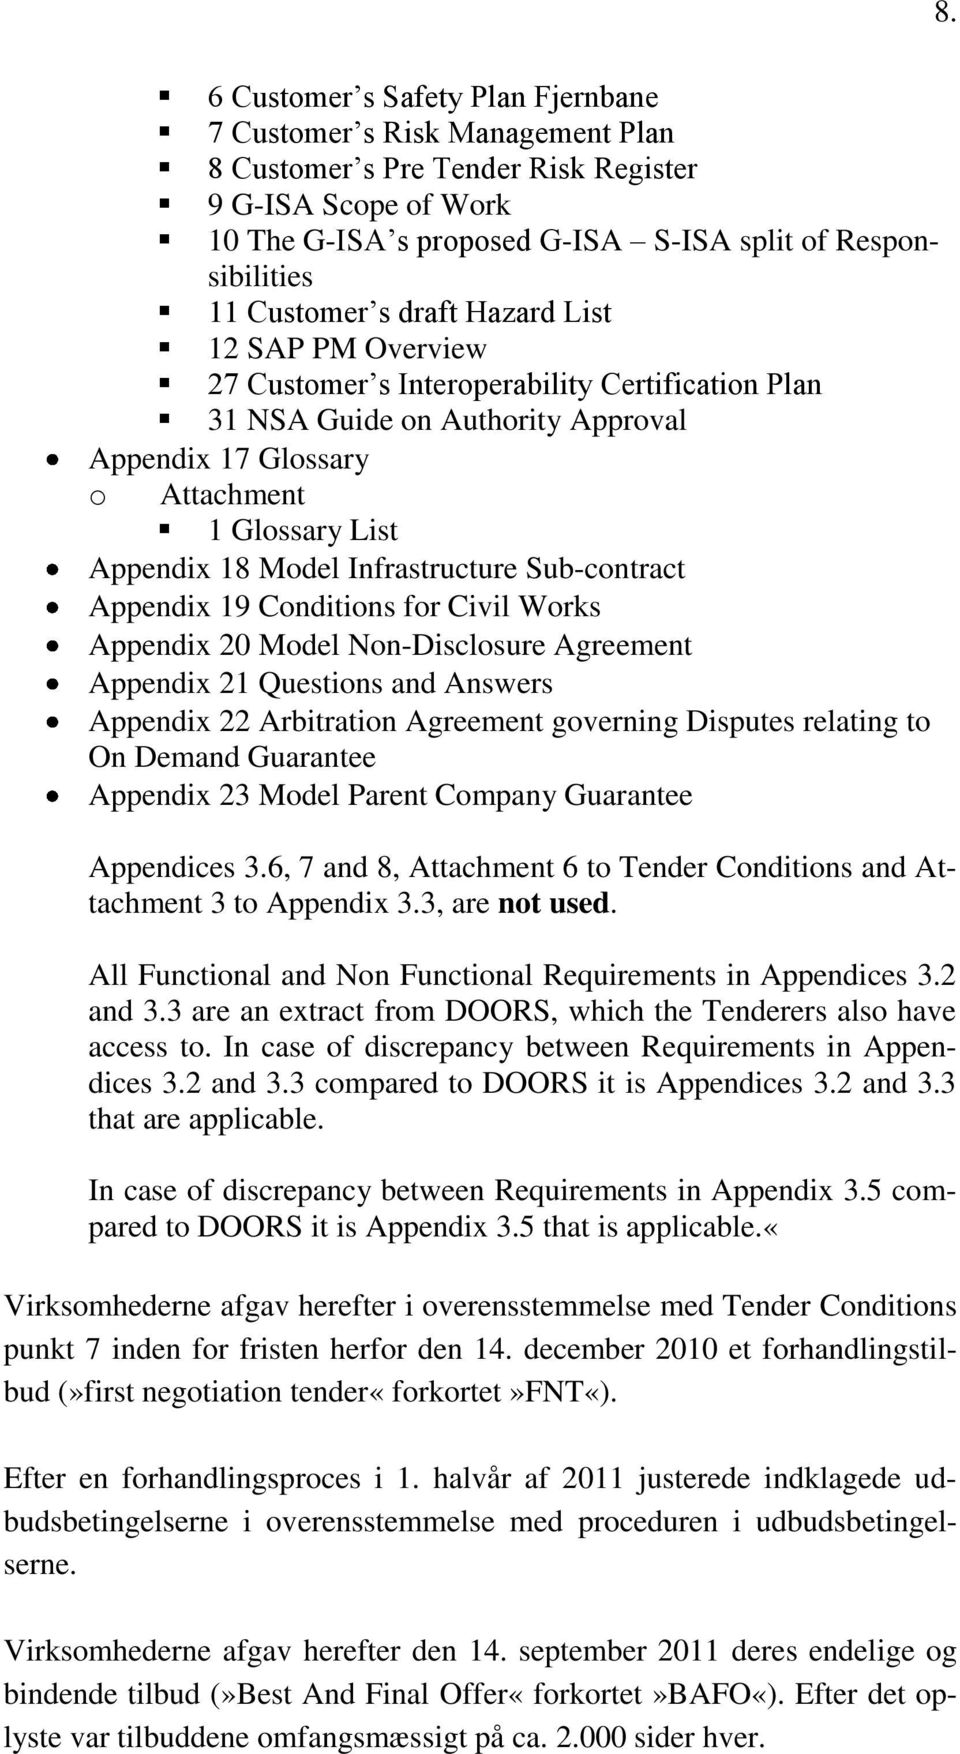 Model Infrastructure Sub-contract Appendix 19 Conditions for Civil Works Appendix 20 Model Non-Disclosure Agreement Appendix 21 Questions and Answers Appendix 22 Arbitration Agreement governing